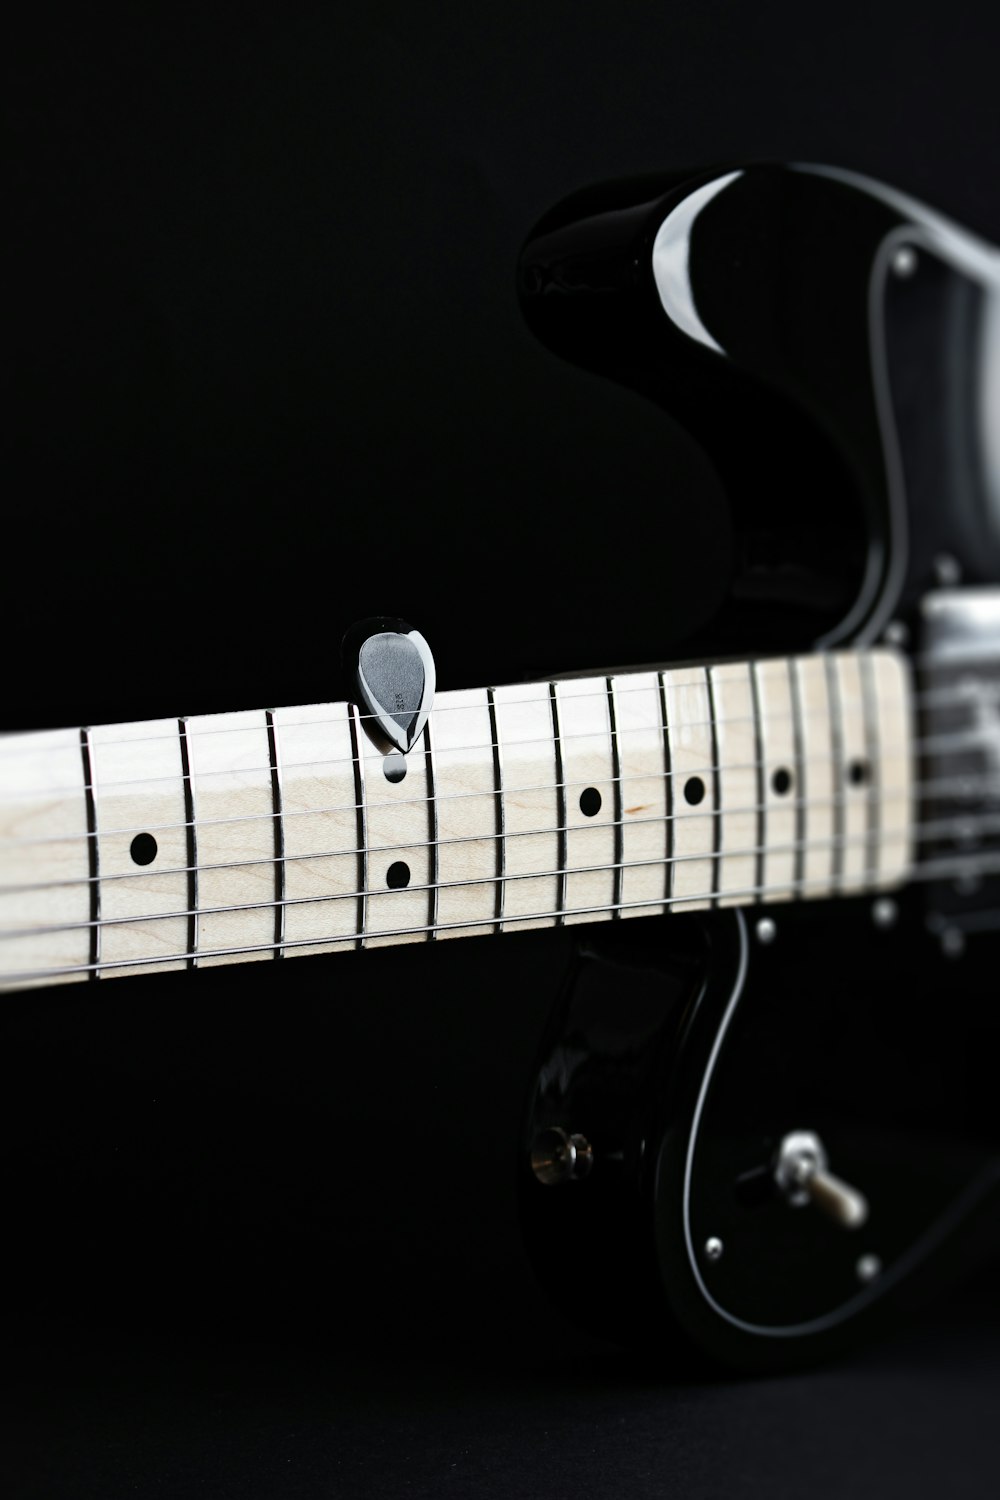 a close up of an electric guitar with a black background